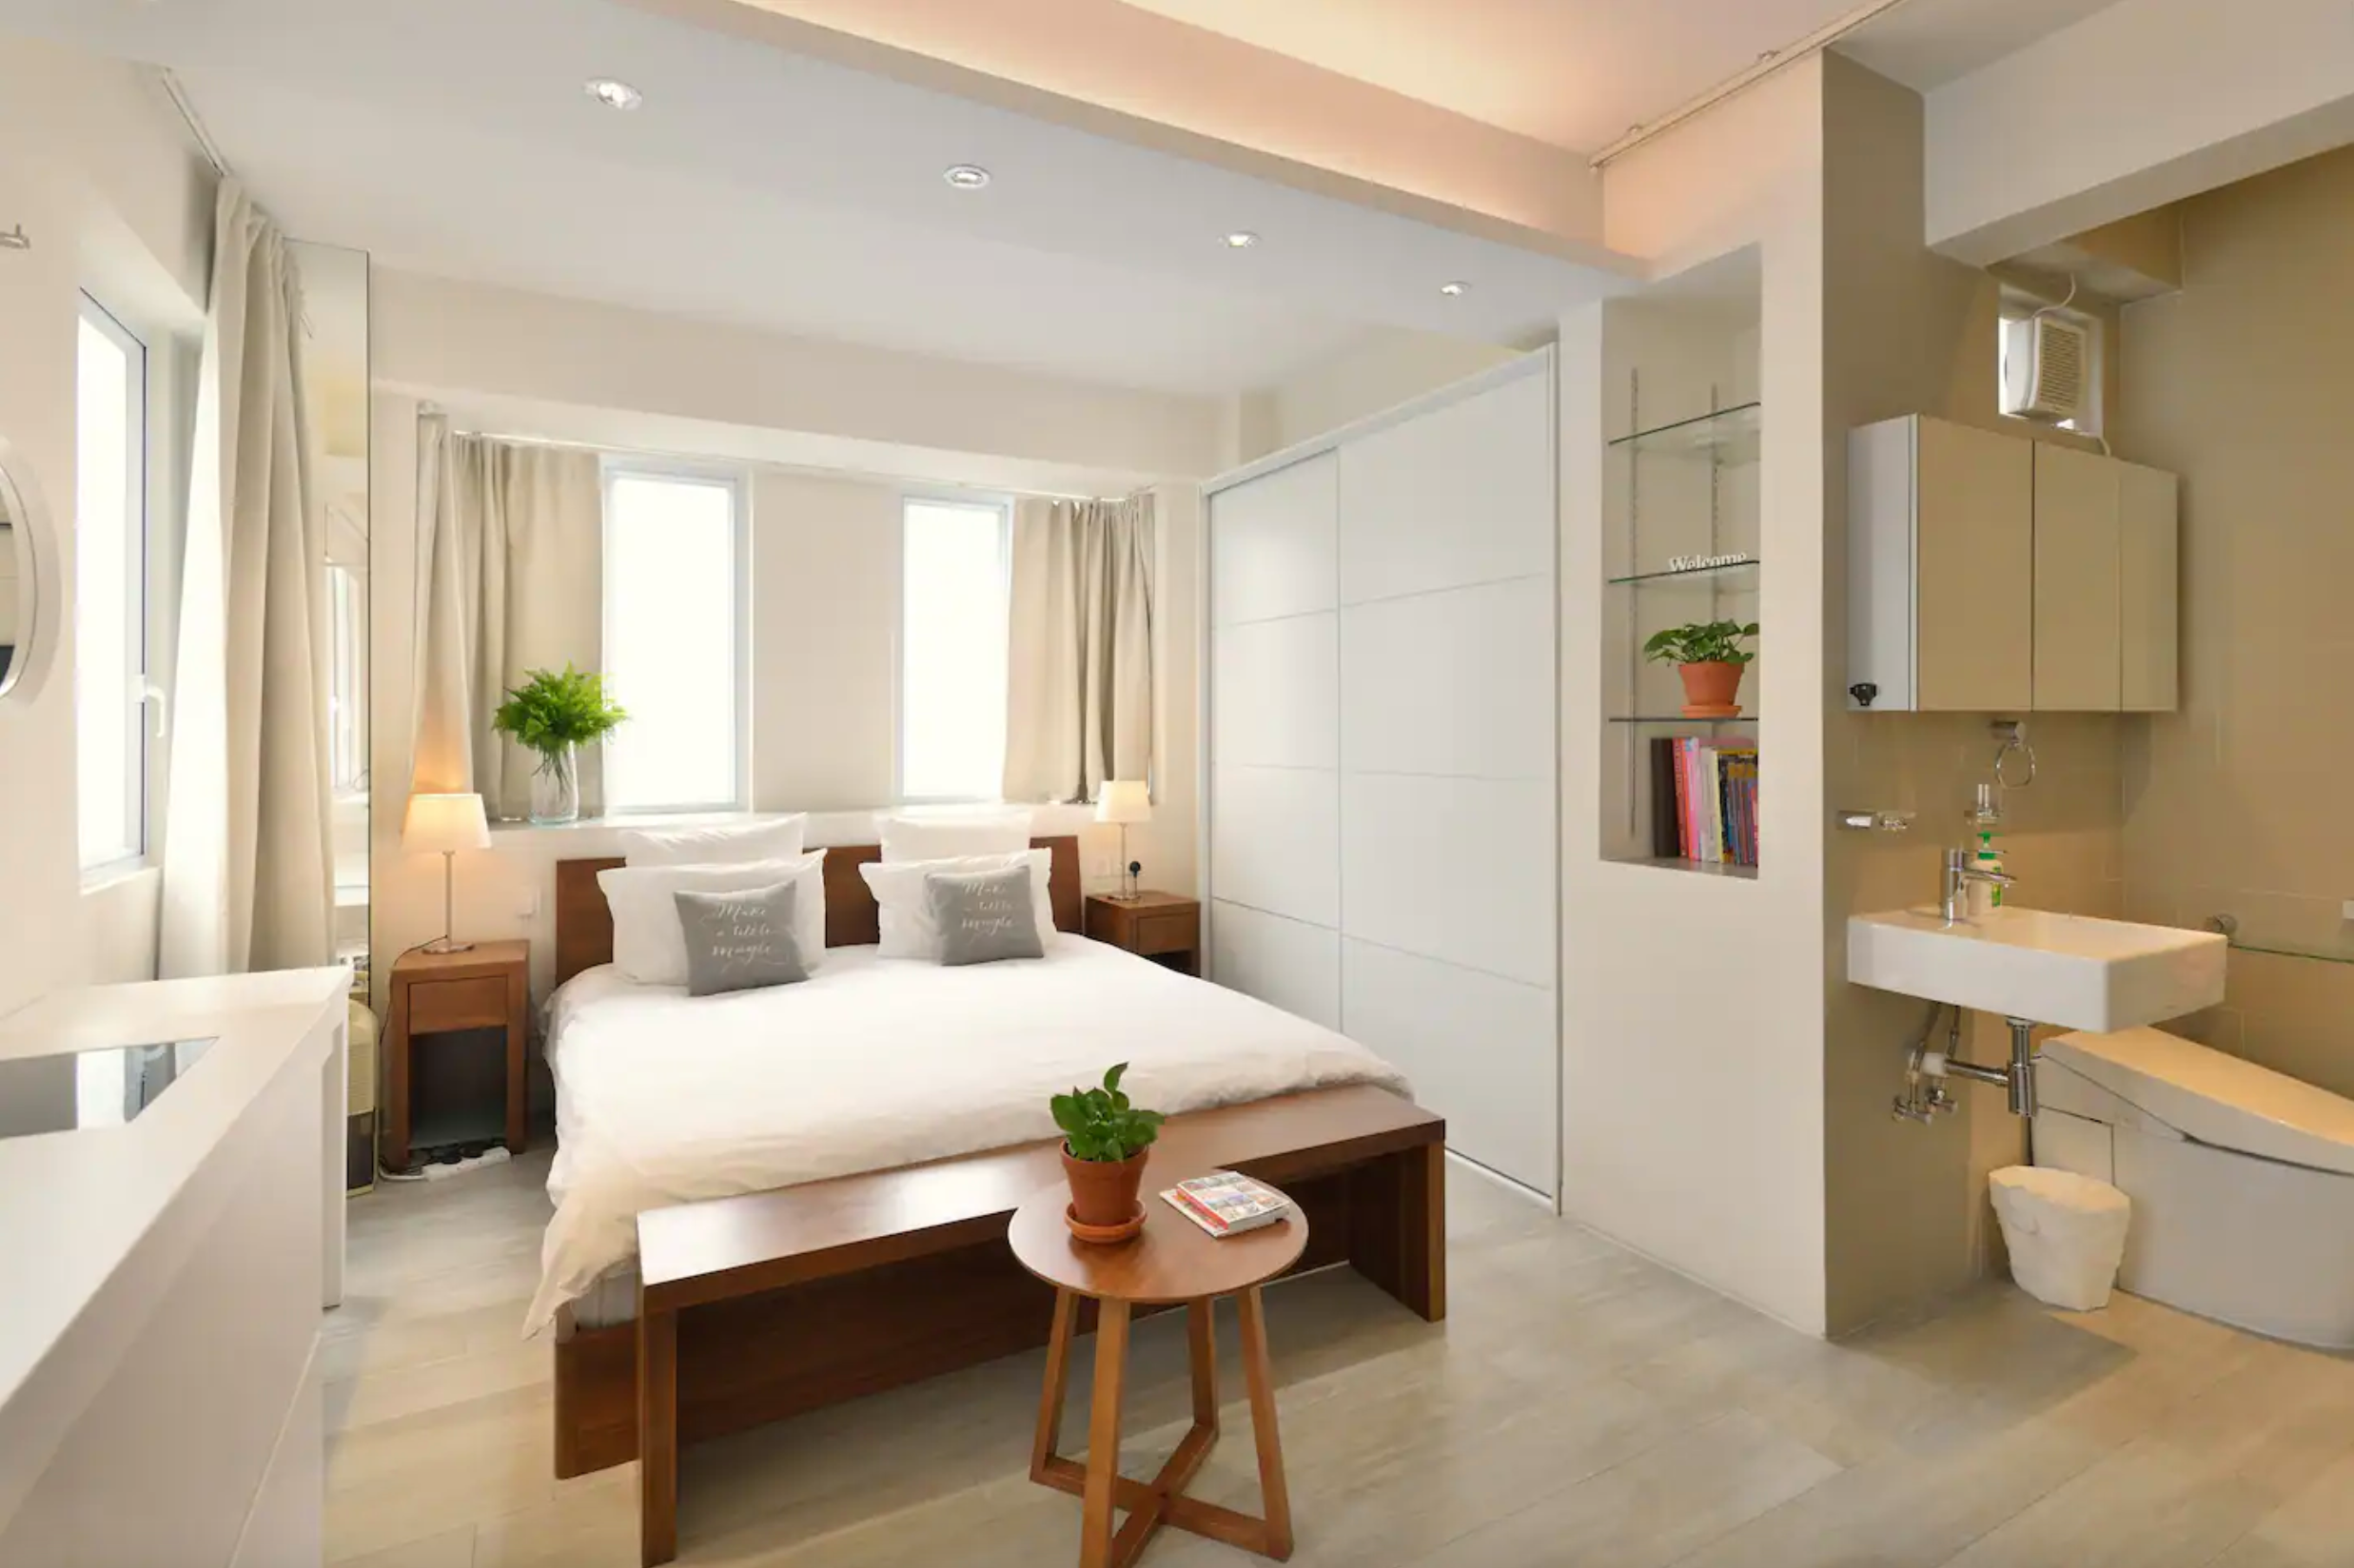 <p><strong>Bed & bath:</strong> 1 bedroom, 1 bath<br> <strong>Top amenities:</strong> Contemporary decor, king-size bed, premium appliances</p> <p>One of our top picks for solo travelers, this Airbnb is surrounded by local eateries and shops in Jordan, one of Hong Kong’s most vibrant neighborhoods. The minimally designed studio features warm woods, crisp white linens, and cream decor. We love the high-end touches, like a king-size bed, smart TOTO toilet, Miele washer and dryer, and fiber-optic Wi-Fi. Fair warning: it’s a snug space with an exposed toilet and shower, so choose a travel buddy you’re <em>very</em> comfortable with. The MTR and high-speed rail are just steps away, while the West Kowloon Cultural District, Tin Hau Temple, Temple Street Night Market, and scenic Sky Corridor (atop the West Kowloon train station) are all within walking distance.</p> $122, Airbnb (starting price). <a href="https://www.airbnb.com/rooms/11291417">Get it now!</a><p>Sign up to receive the latest news, expert tips, and inspiration on all things travel</p><a href="https://www.cntraveler.com/newsletter/the-daily?sourceCode=msnsend">Inspire Me</a>